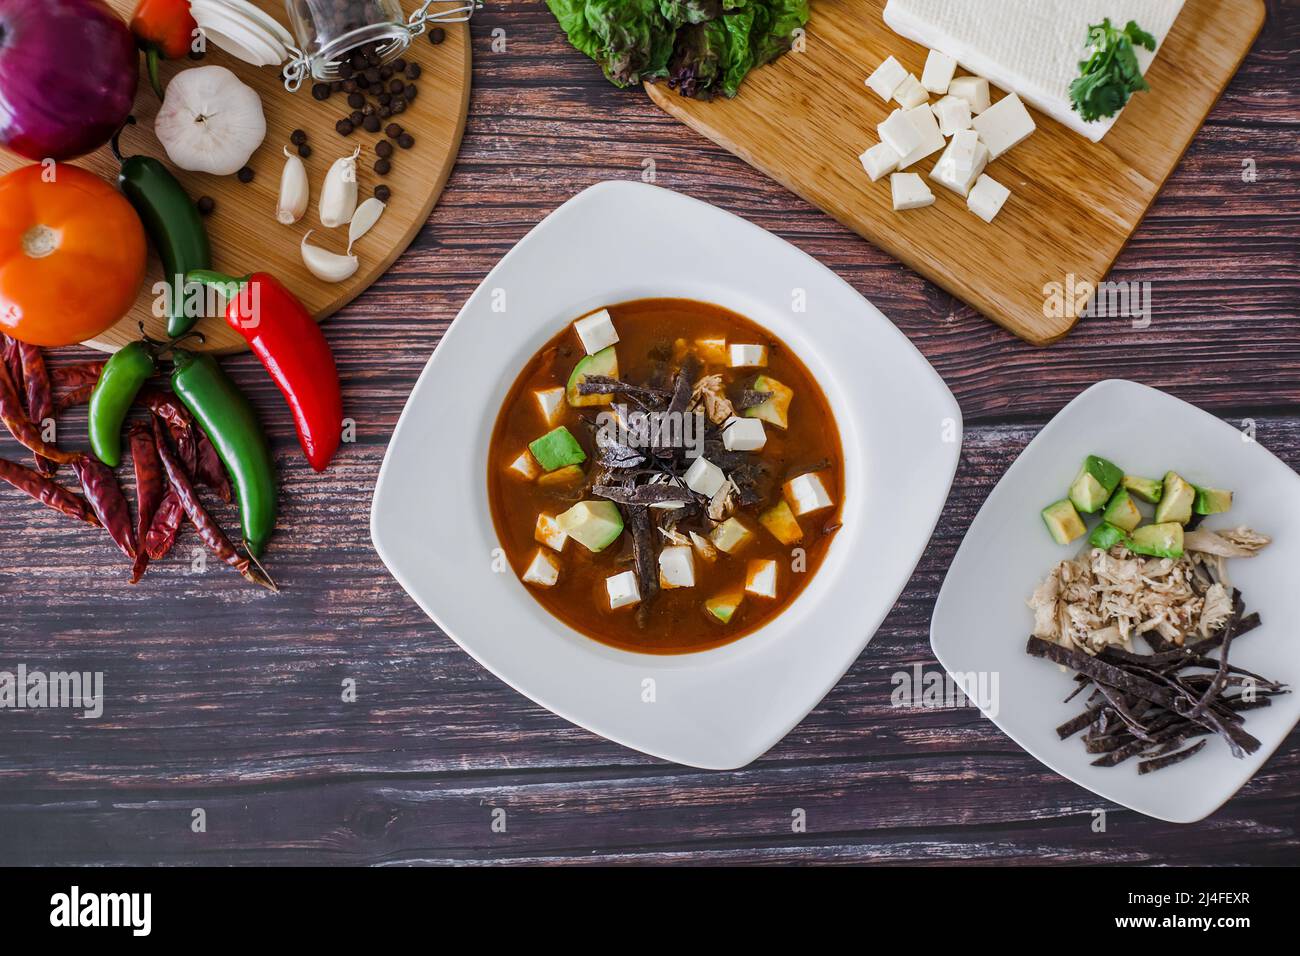 Mexican Tortilla Soup with Chili and ingredients traditional food in Mexico Stock Photo